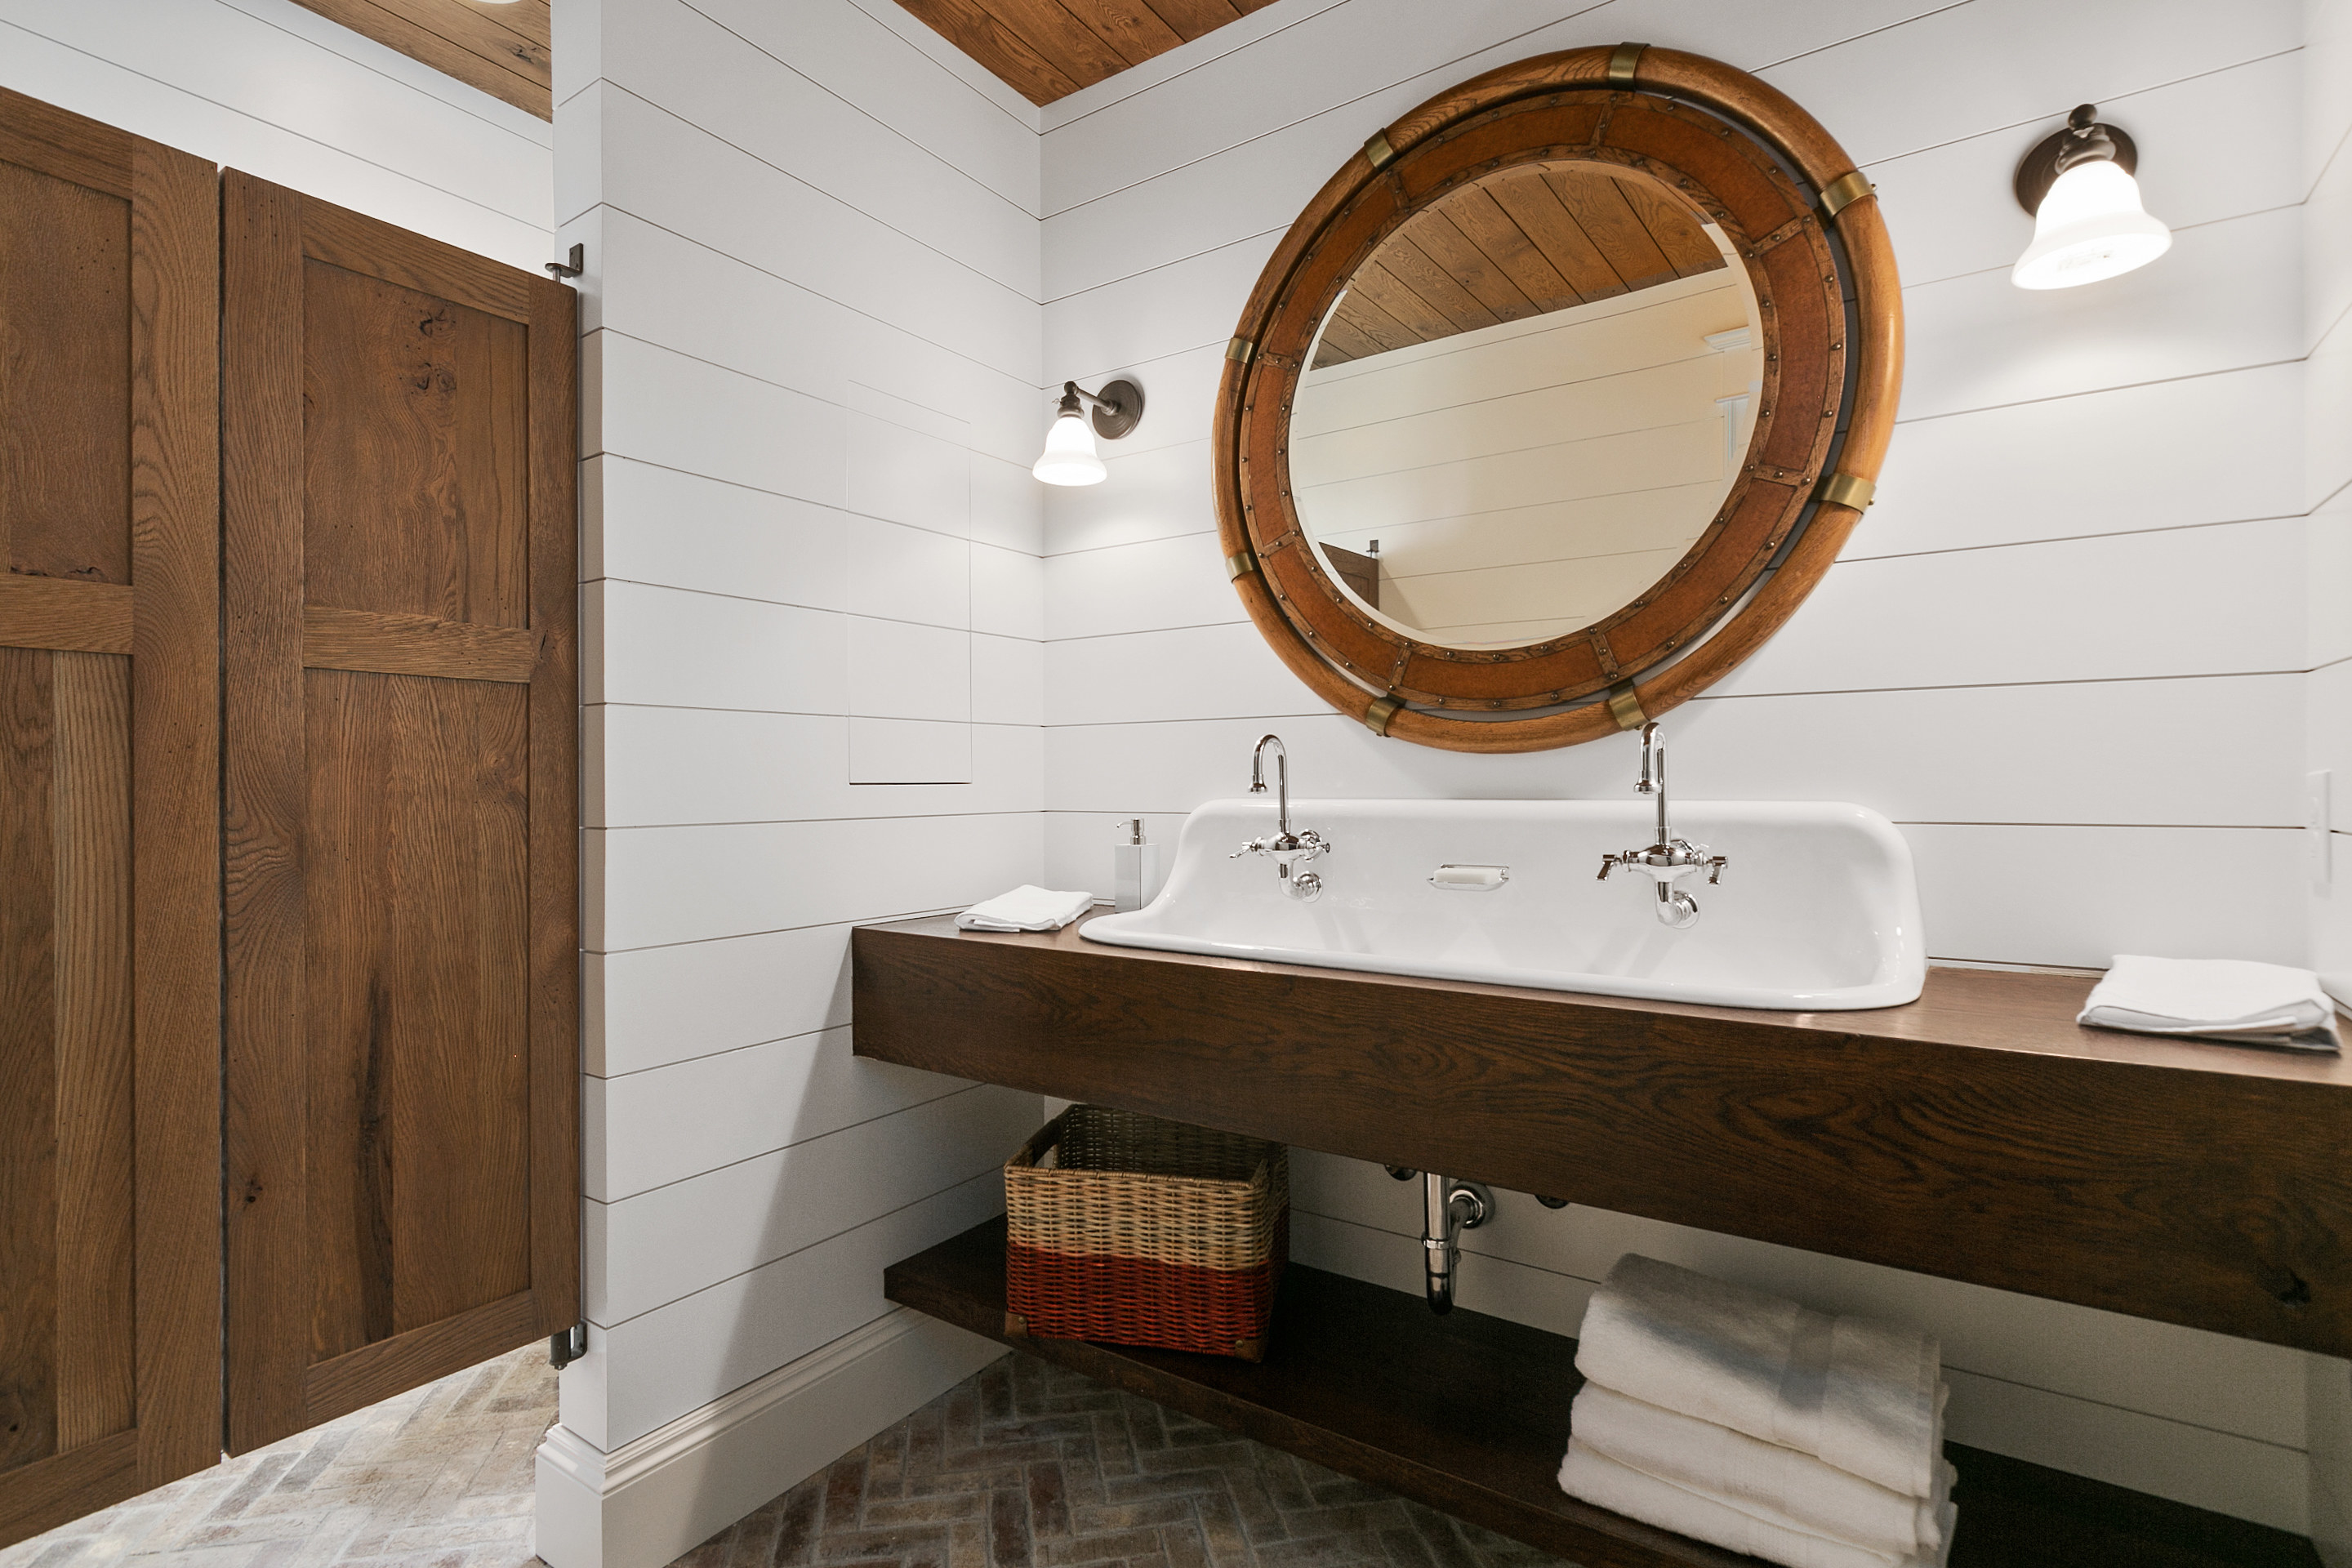 White shiplap wall in a bathroom with natural wood accents